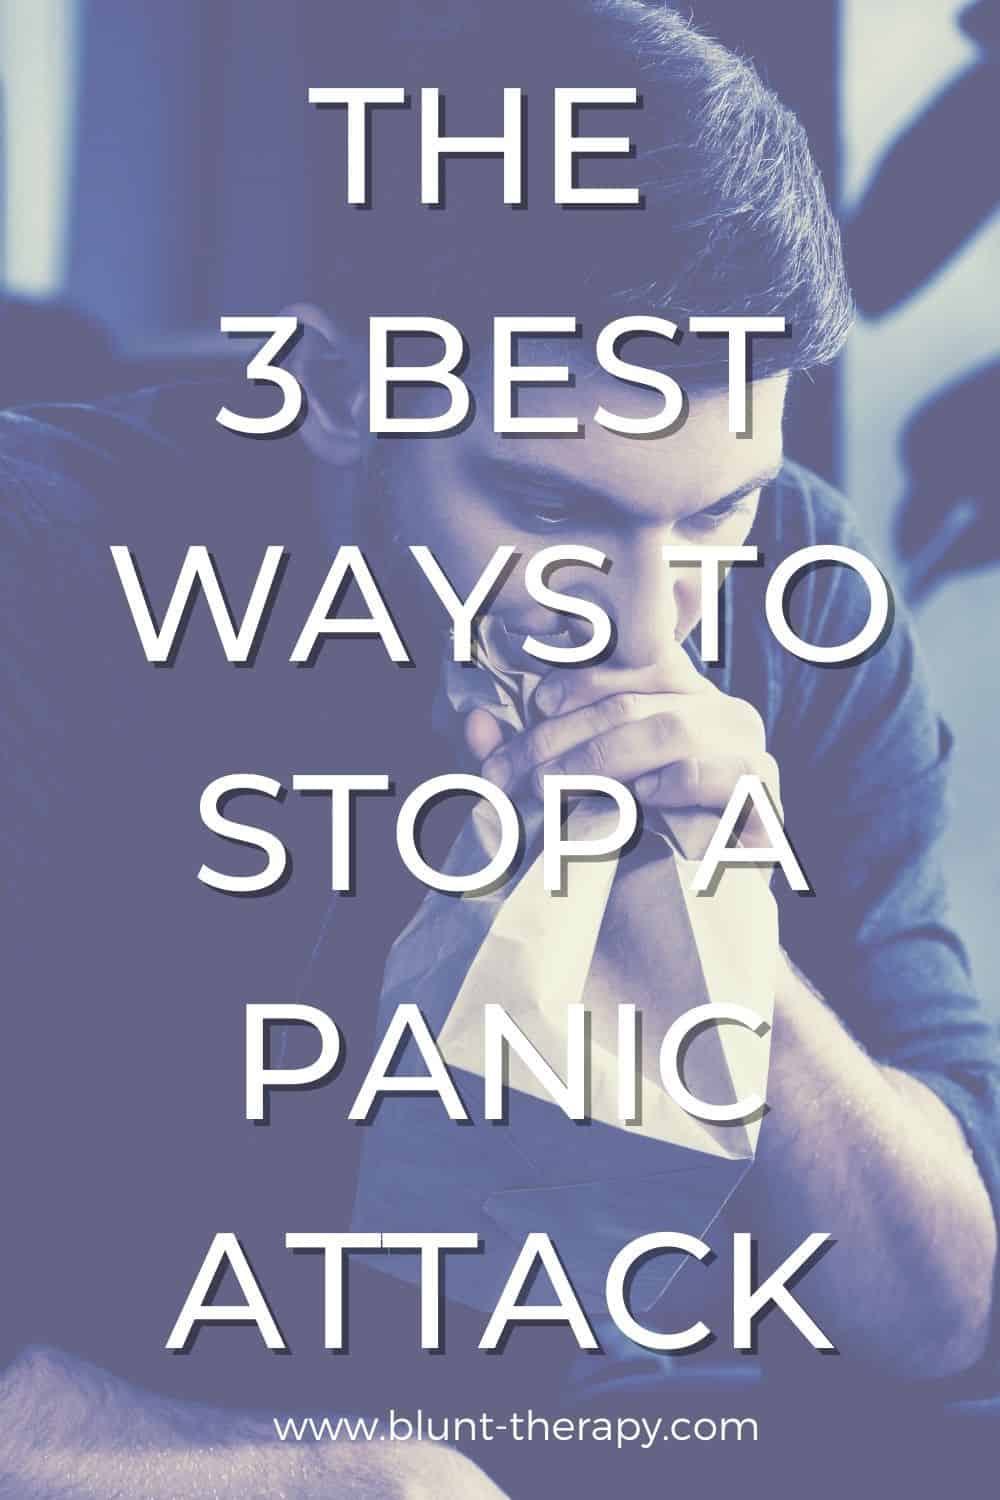 3 Simple Ways To Stop A Panic Attack (Without Medication)